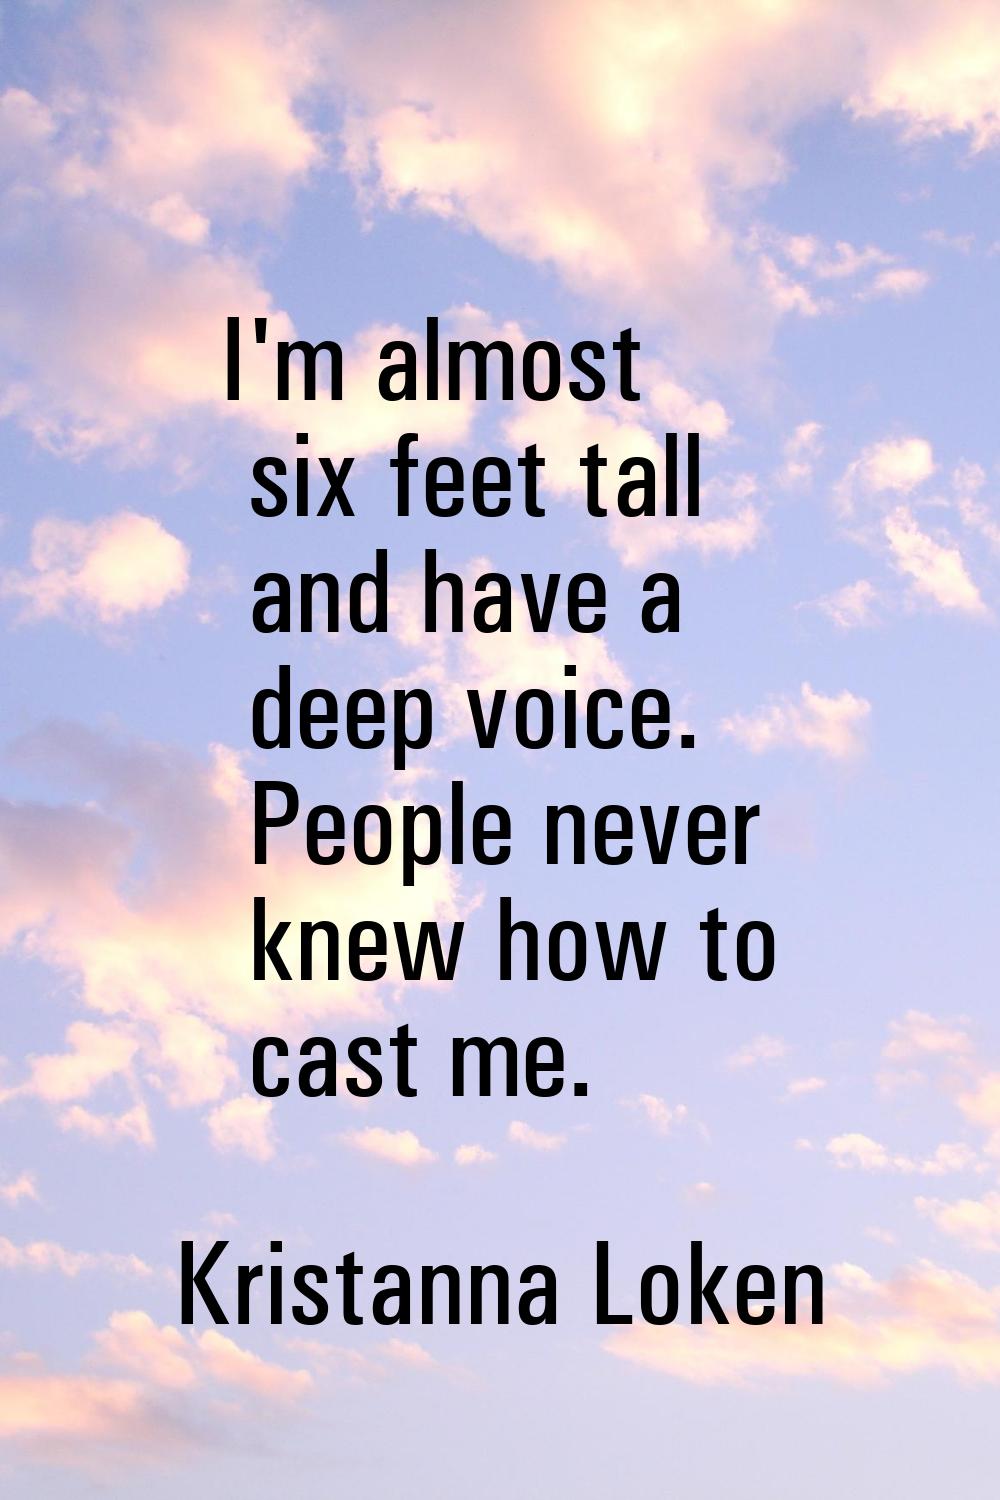 I'm almost six feet tall and have a deep voice. People never knew how to cast me.